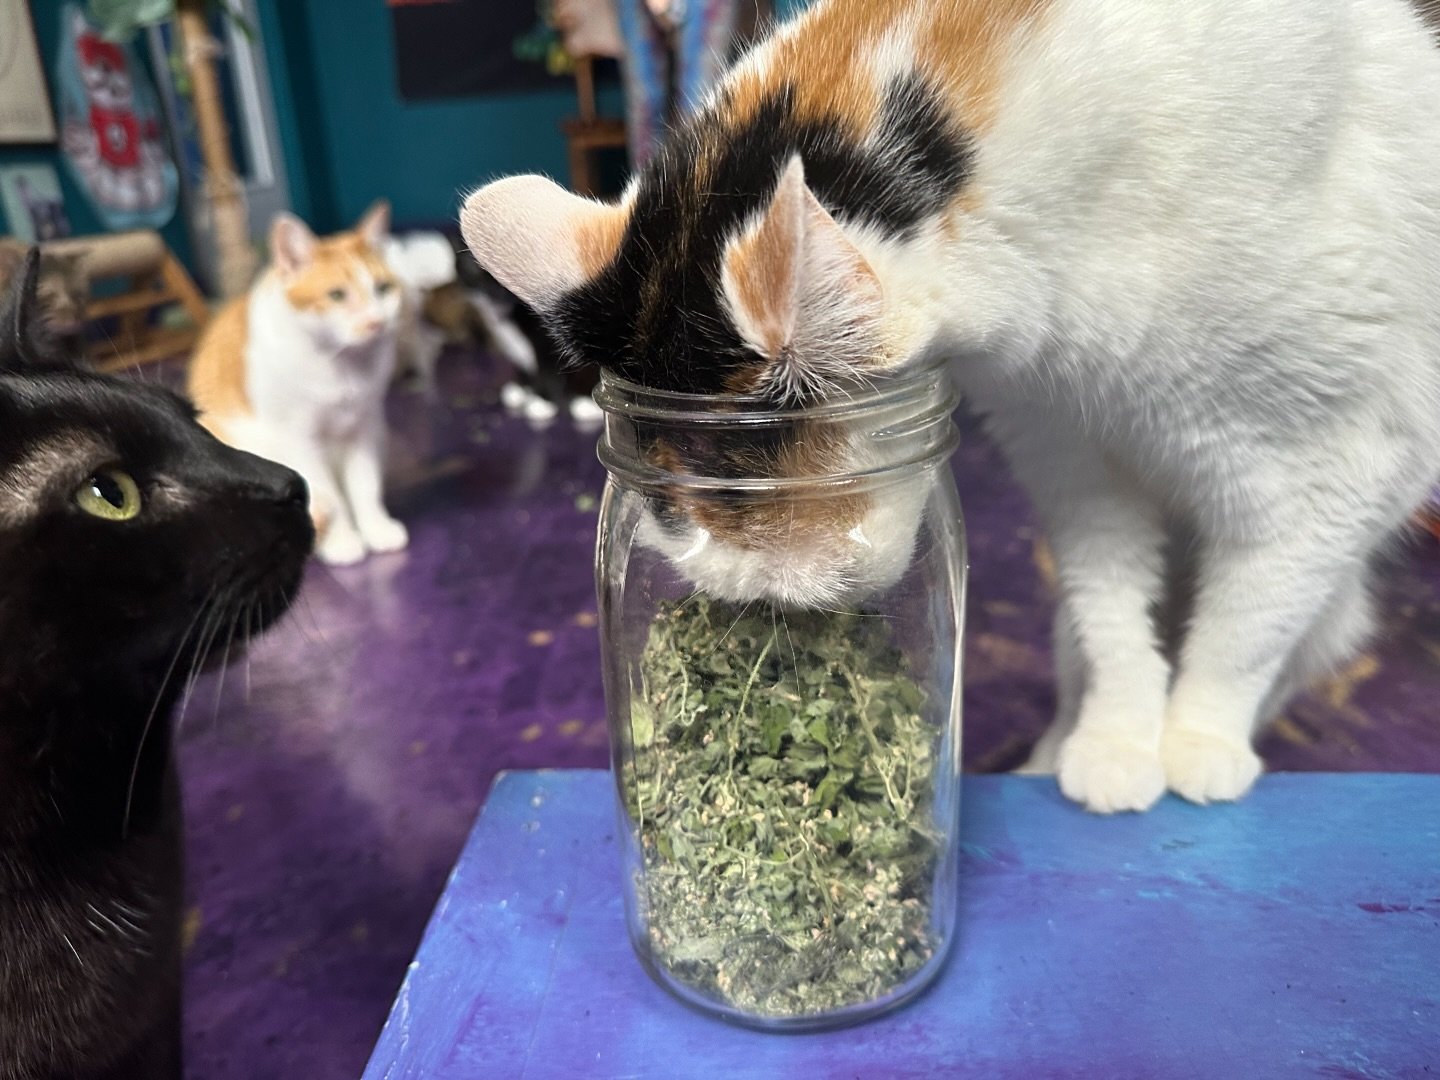 When the catnip hits 😹

Hey Atlanta!
We open at 11:11am Thursday - Saturday 
&amp; Sundays at 1:11pm for Cat Yoga and Music in Sound Gallery. 

Come get your day time cat snuggles!